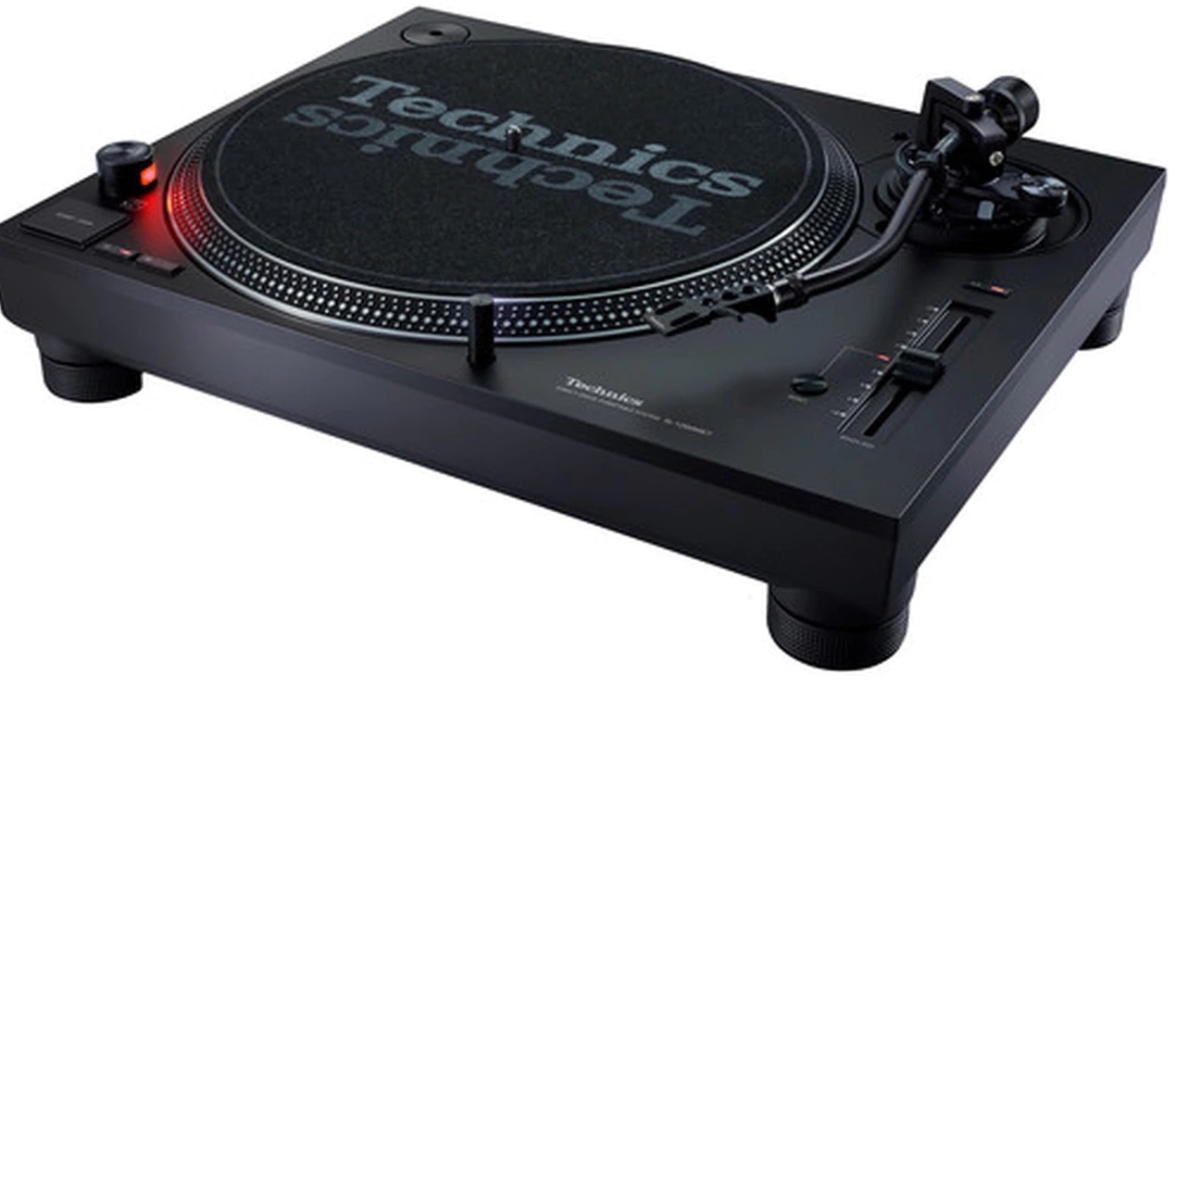 Picture of Technics SL1200MK7 Direct Drive Turntable System